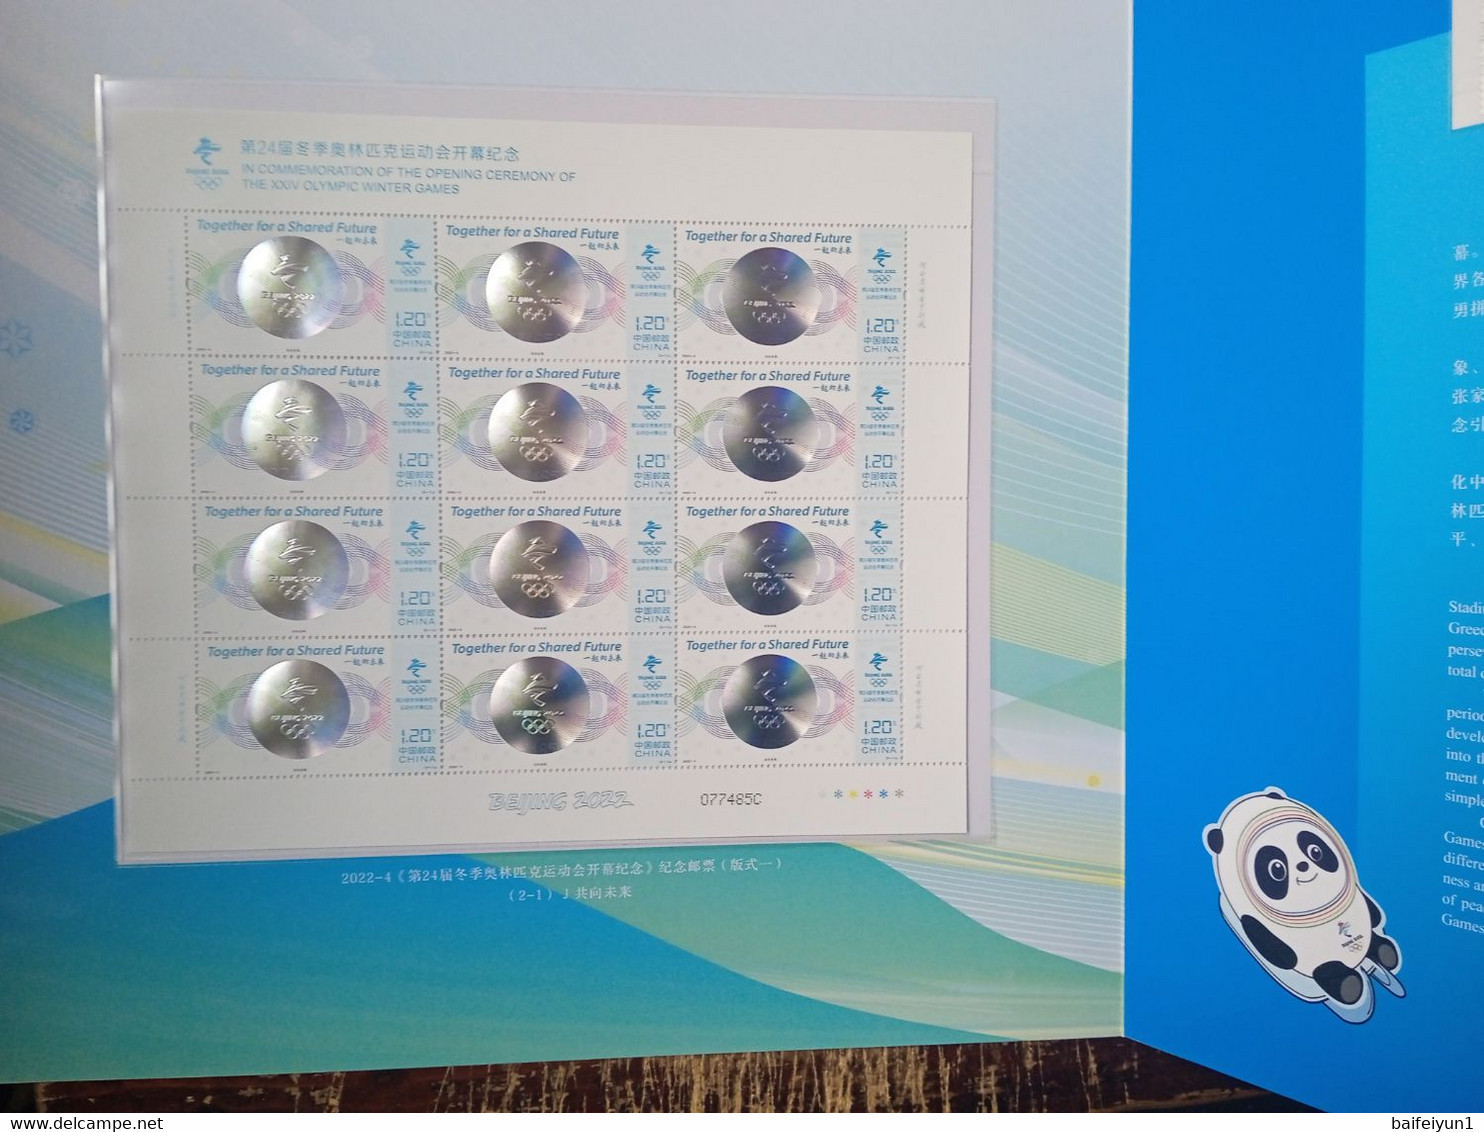 China 2022-4 The Opening Ceremony Of The 2022 Winter Olympics Game Stamps 2v(Hologram) Full Sheet Folder - Invierno 2022 : Pekín